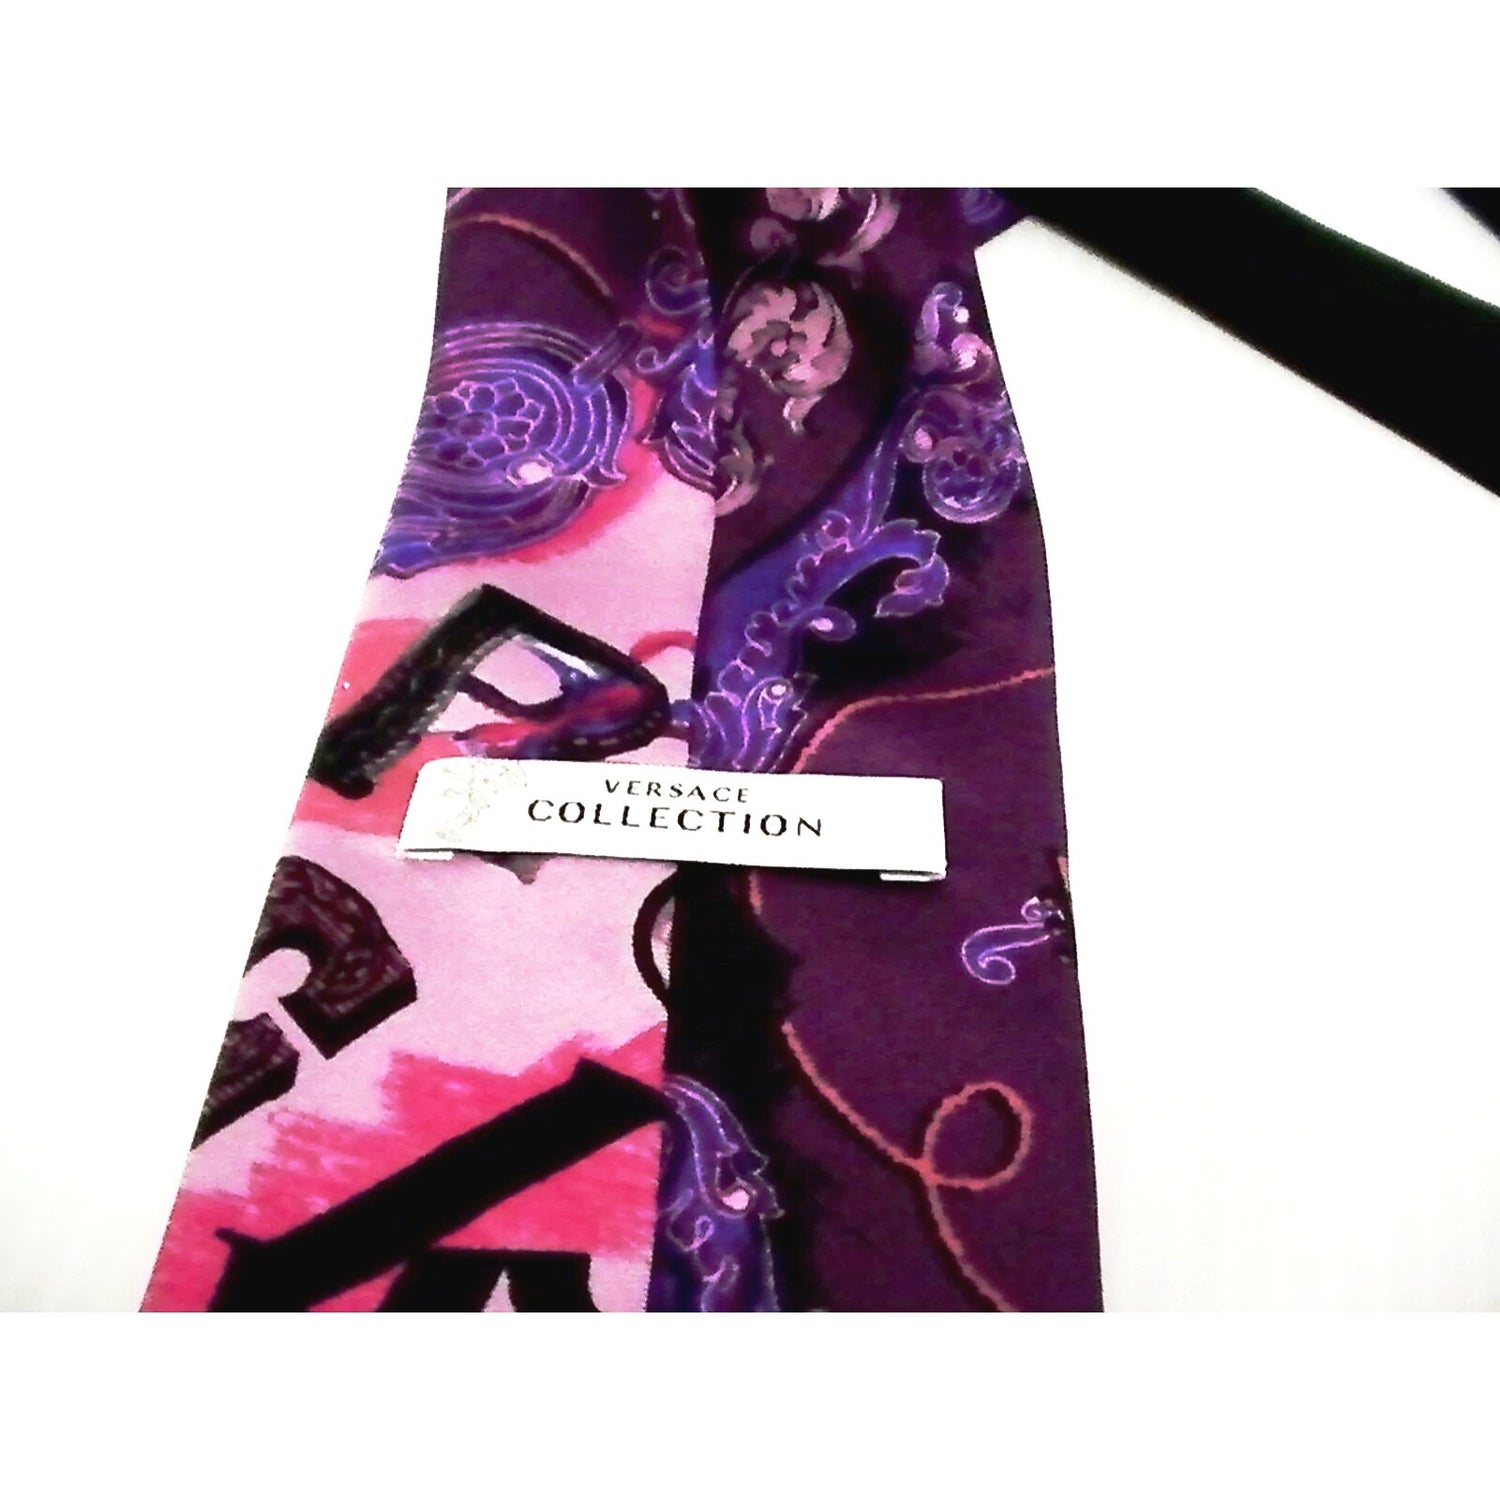 GIANNI VERSACE MEDUSA / Men's 100% SILK TIE collection rare made in Italy